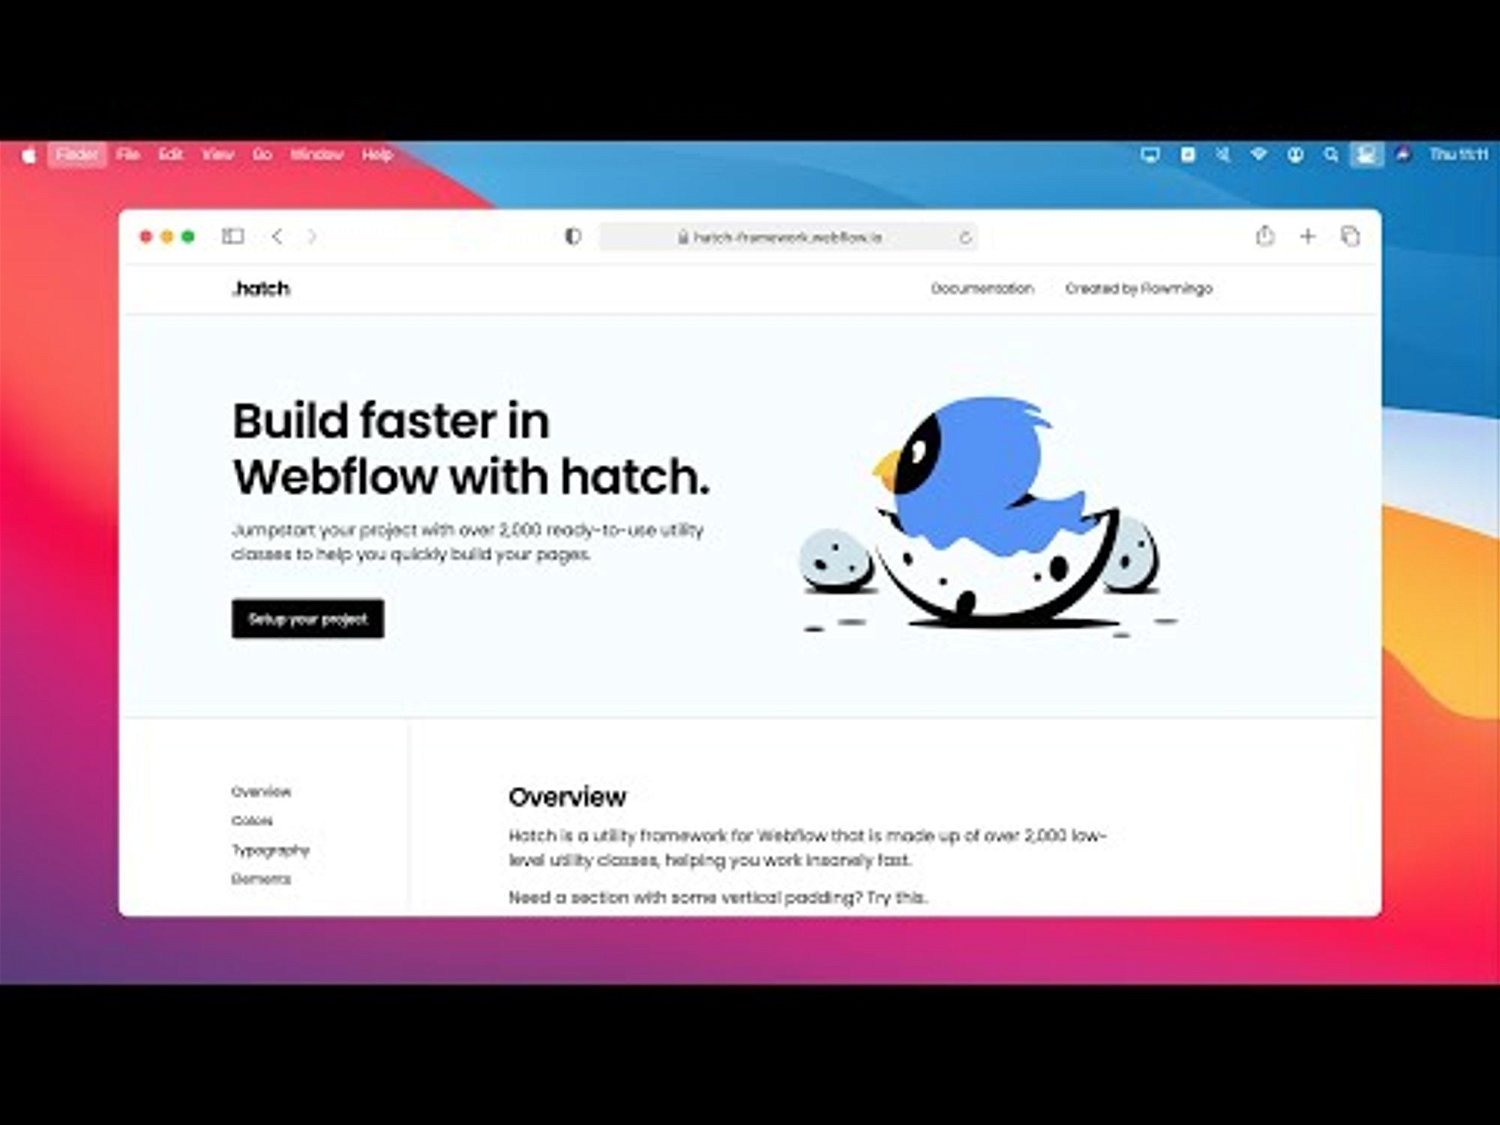 A New Framework for Webflow Just Hatched!